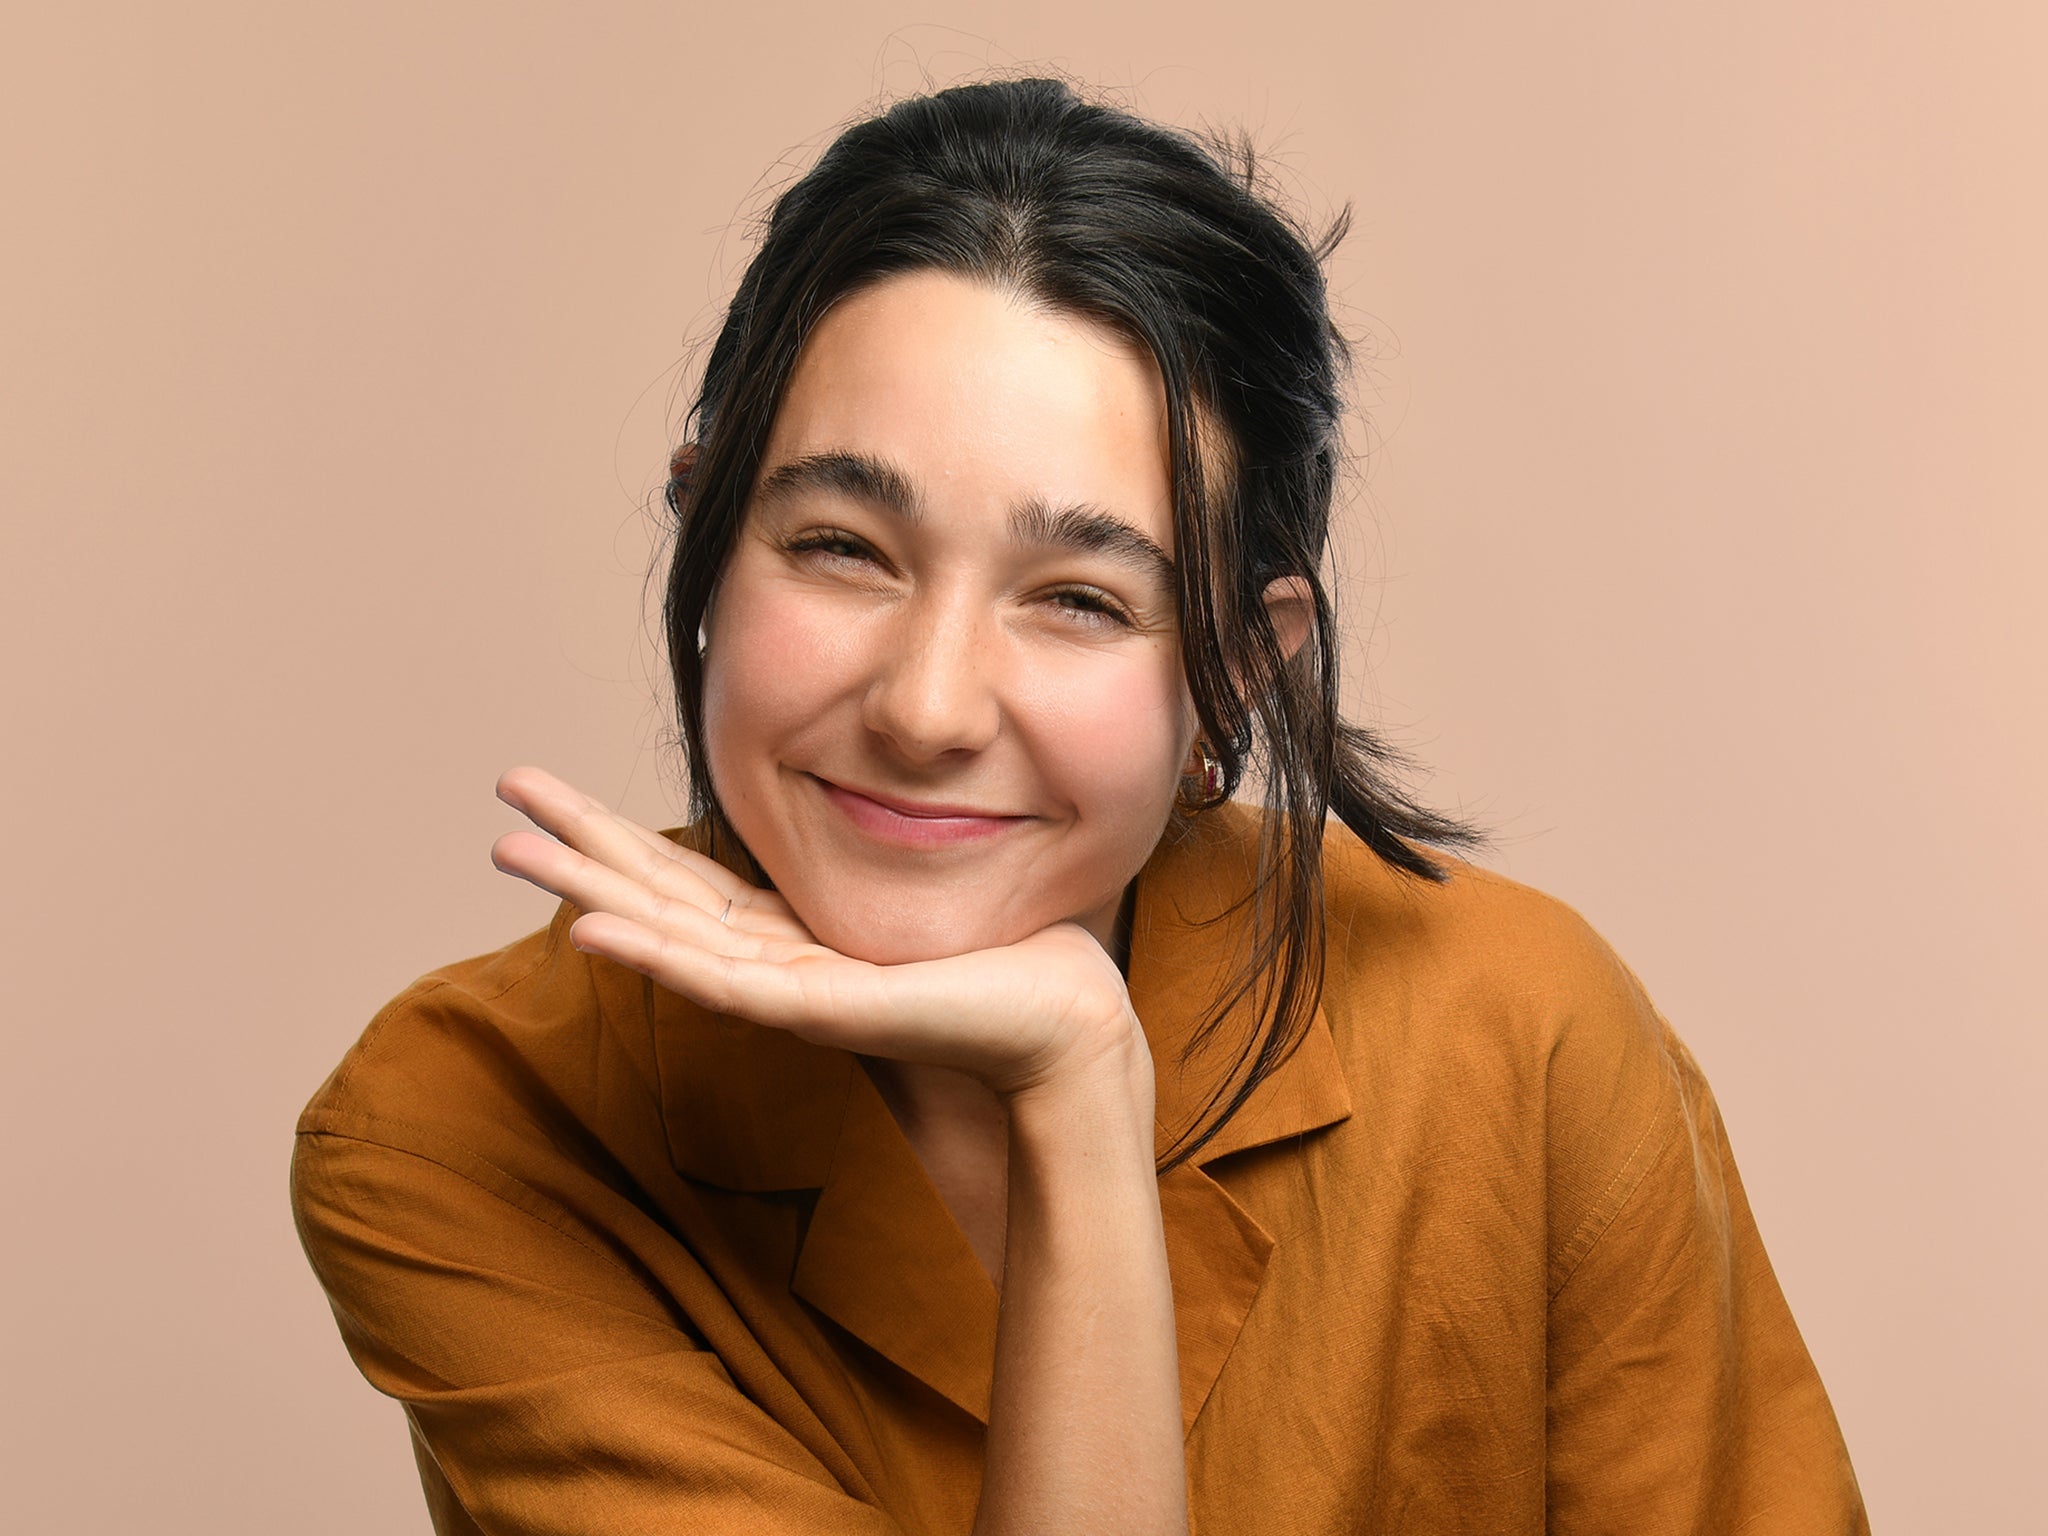 Comedian Lara Ricote, who makes an appearance in our ‘Best Jokes at Fringe’ rundown